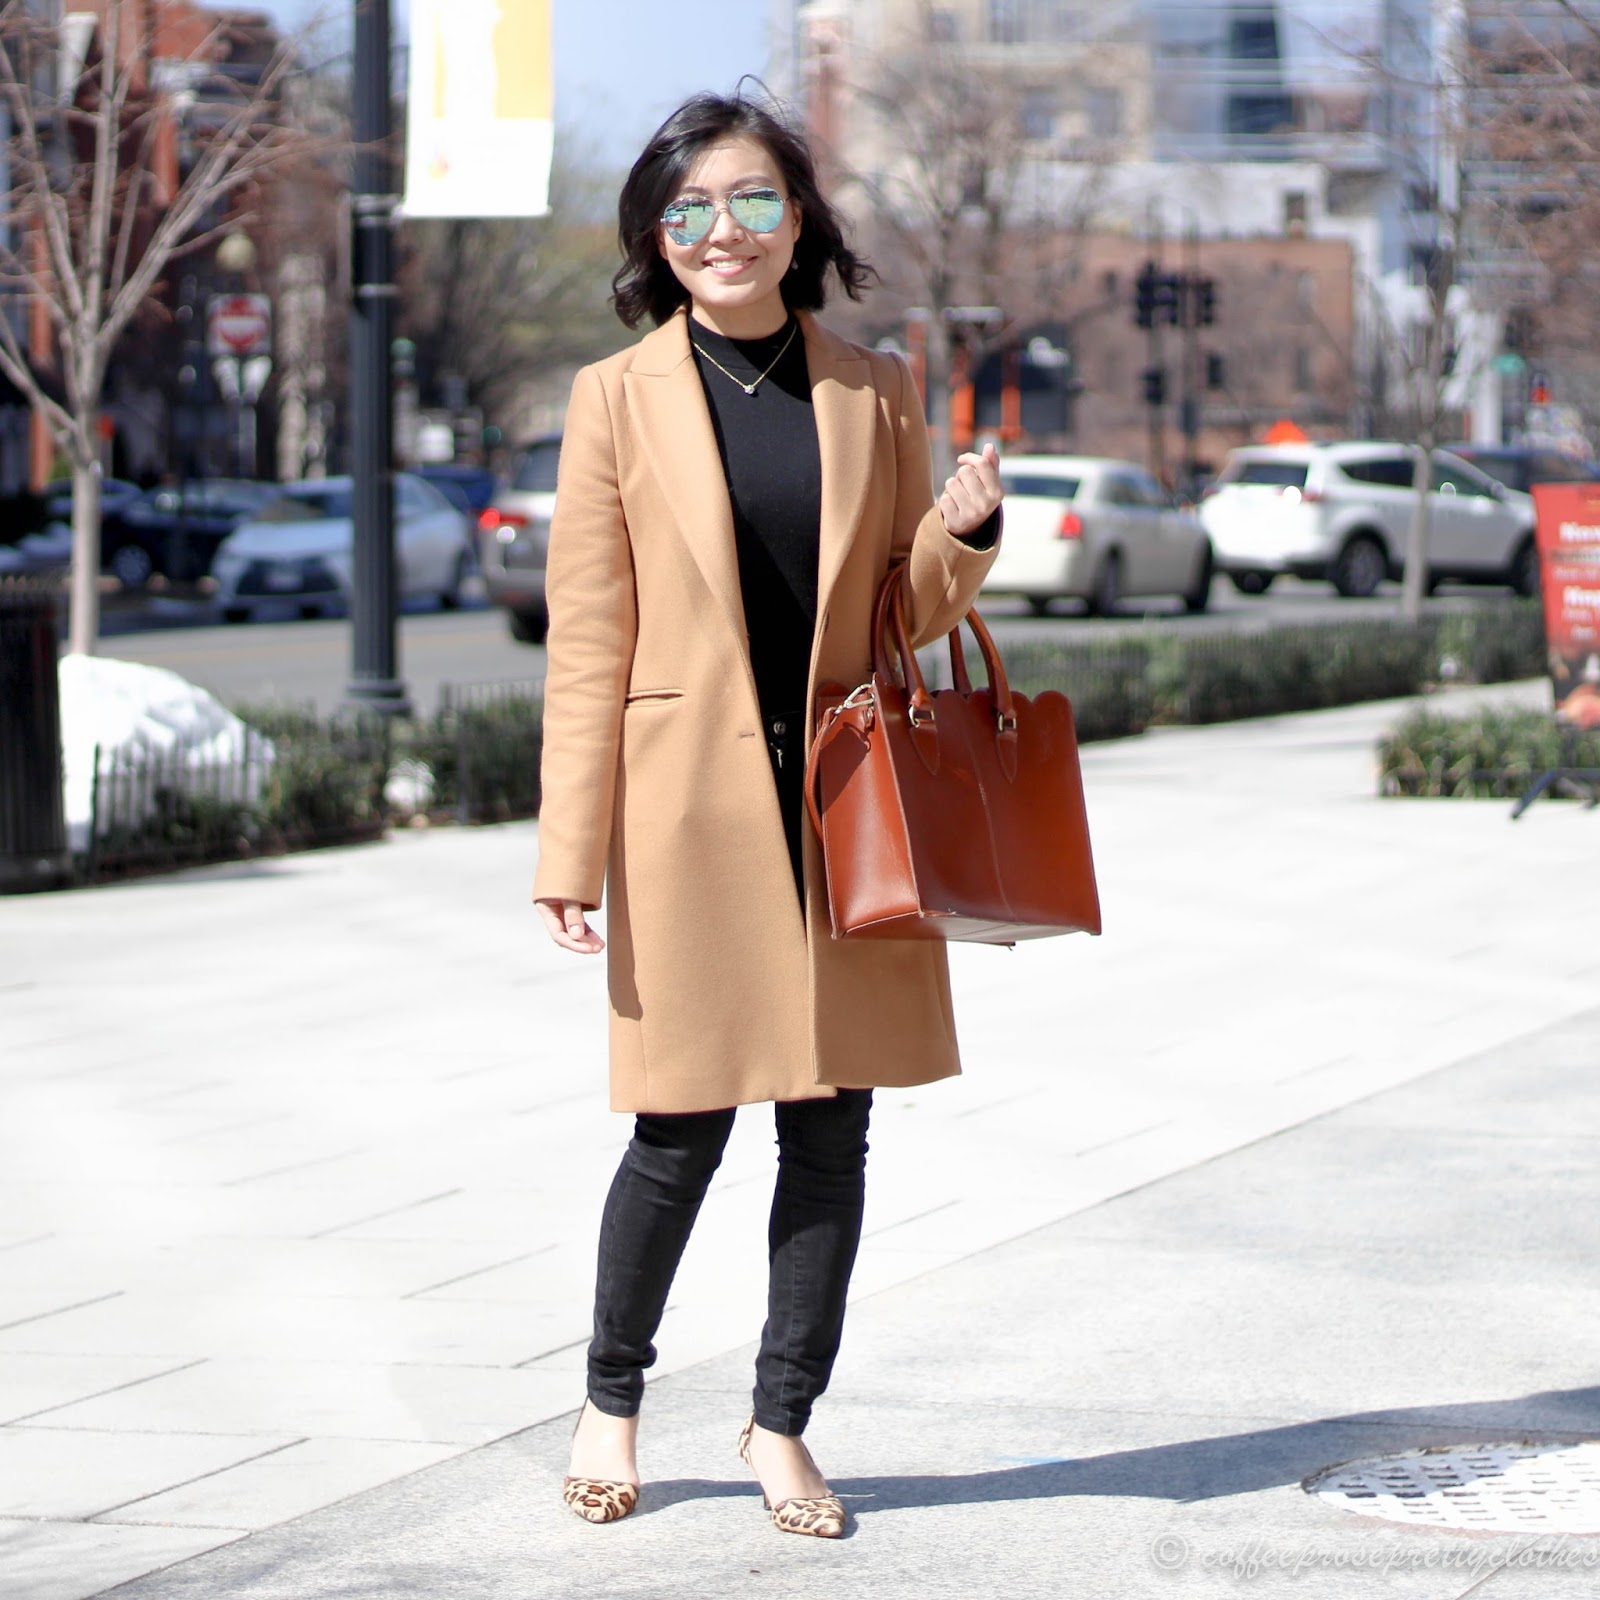 How to Find the Perfect Camel Coat | Camel Coat and Scalloped Bag